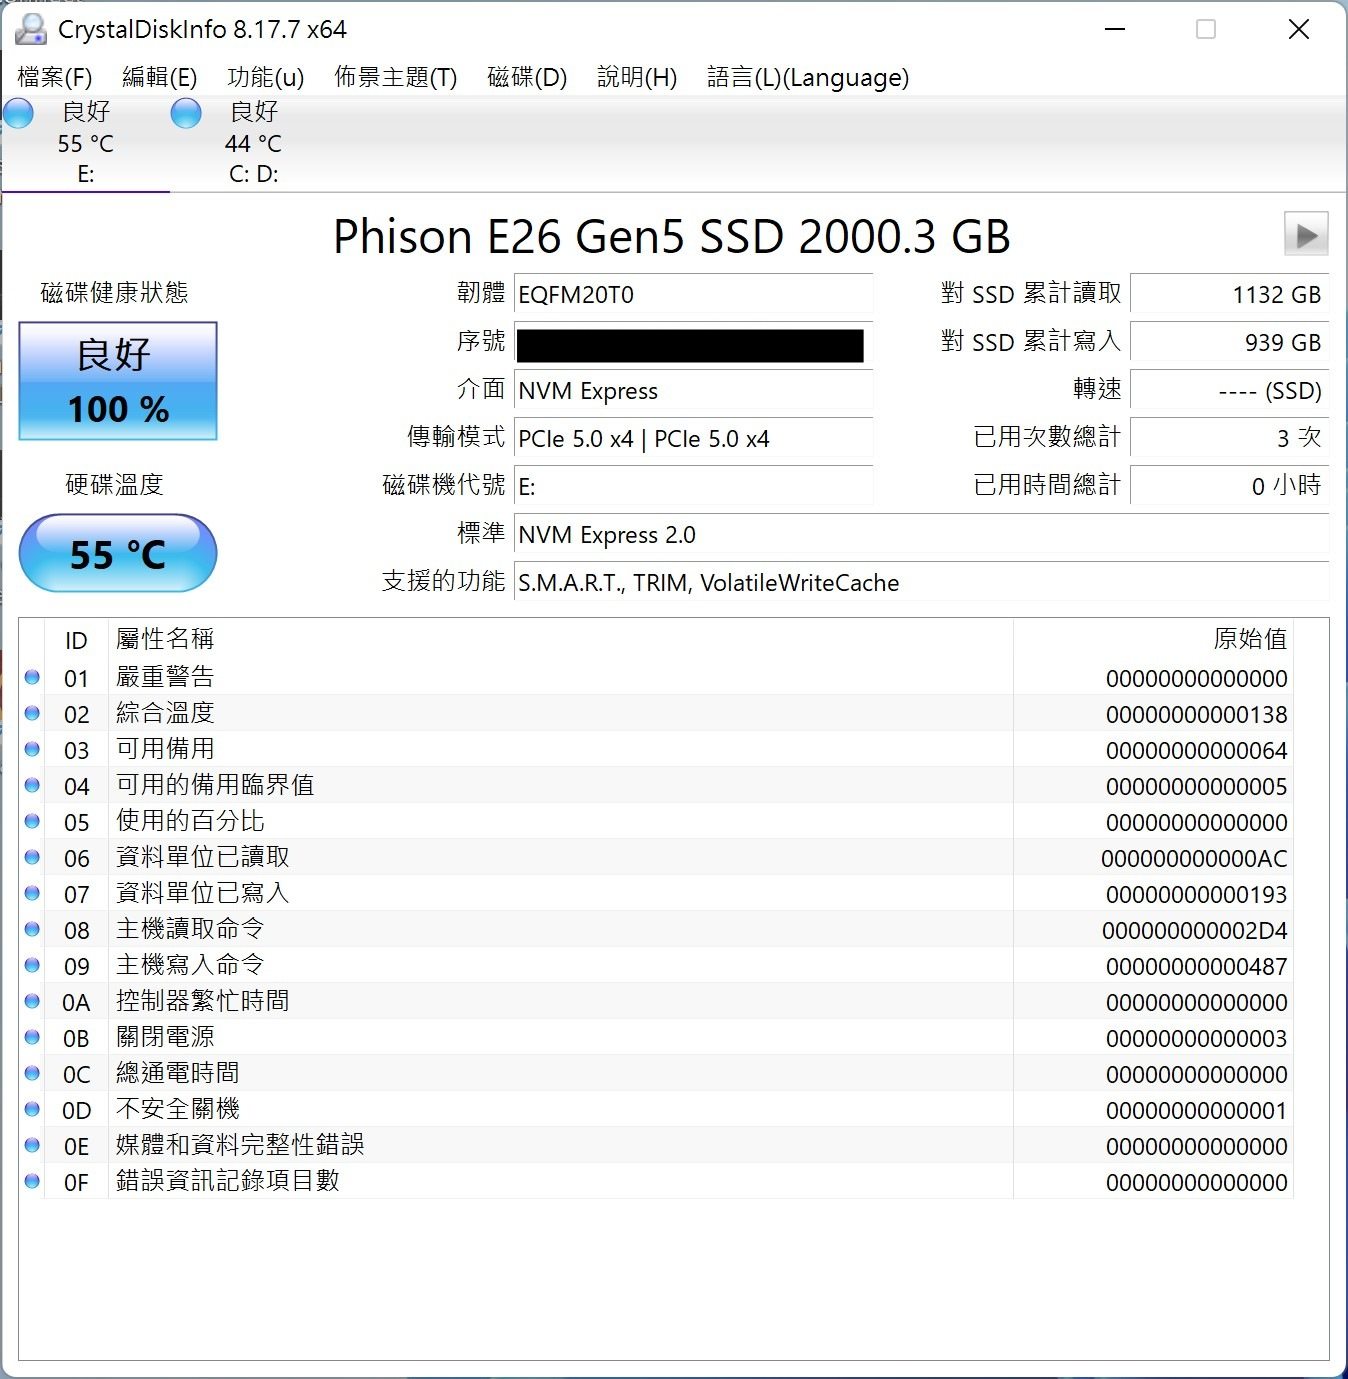 In CrystalDiskInfo, you can see that the hard disk name is Phison E26 Gen5, and the transmission mode is PCIe 5.0 x4.